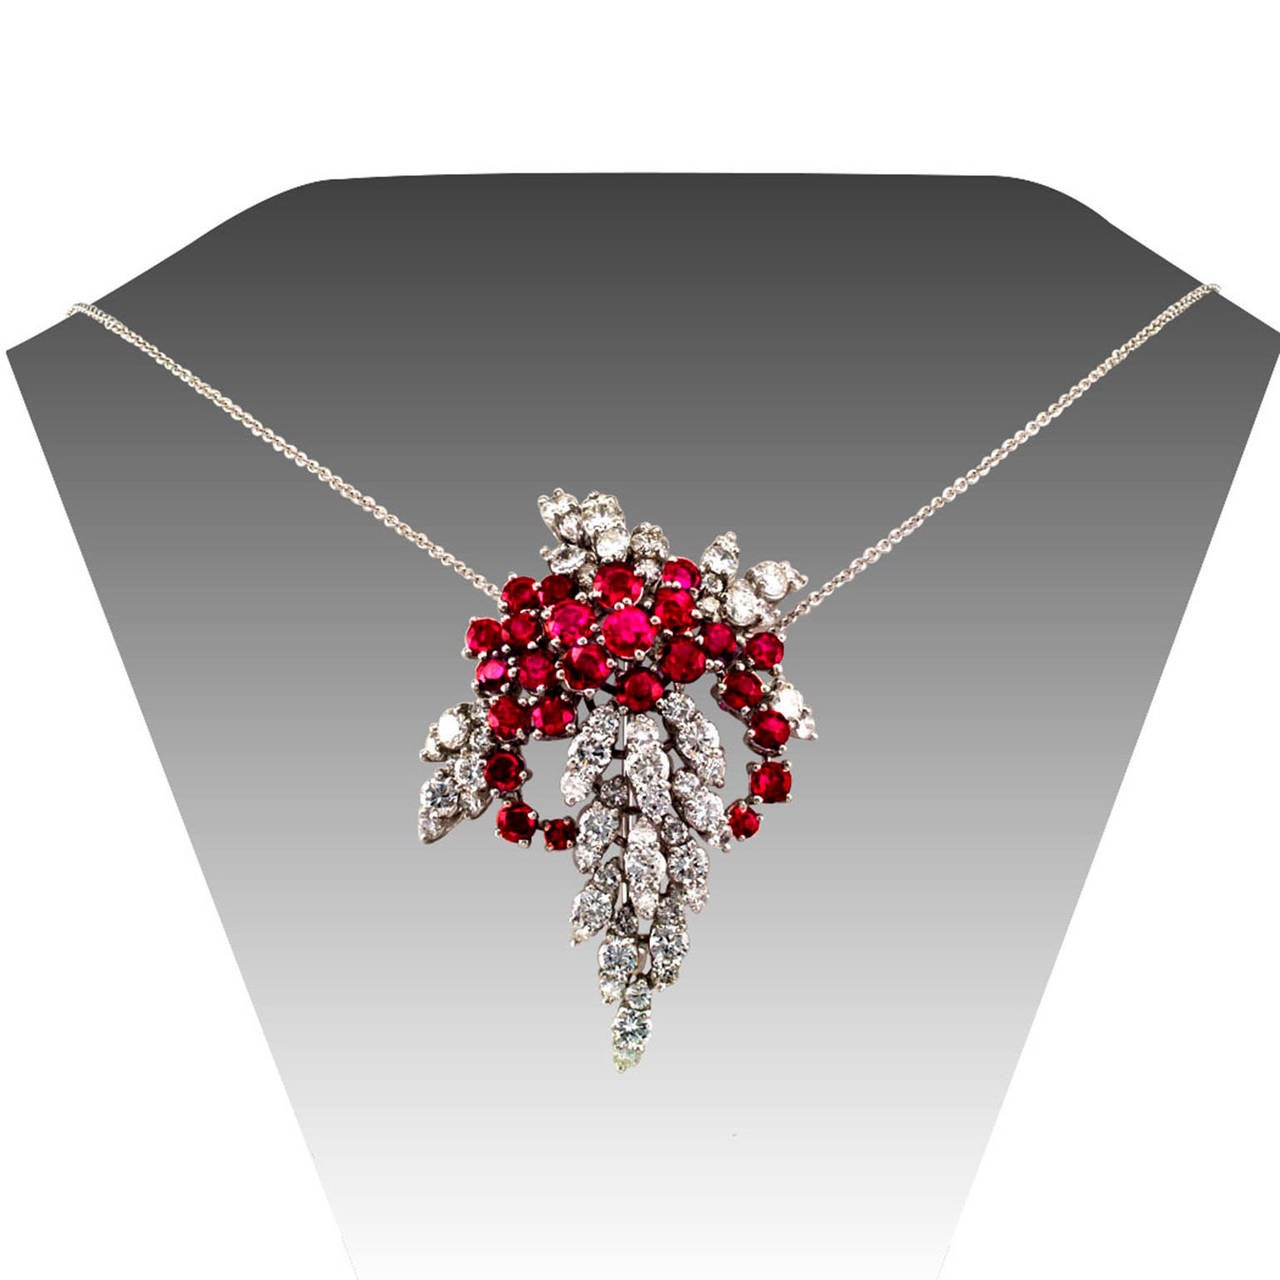 Ruby and Diamond Cascade Brooch-Pendant

Red rubies flashing against surrounding diamonds, a precious kindling that thrills and delights the senses.  Designed as a glamorous platinum brooch, the back fitted with two loops that permit threading a